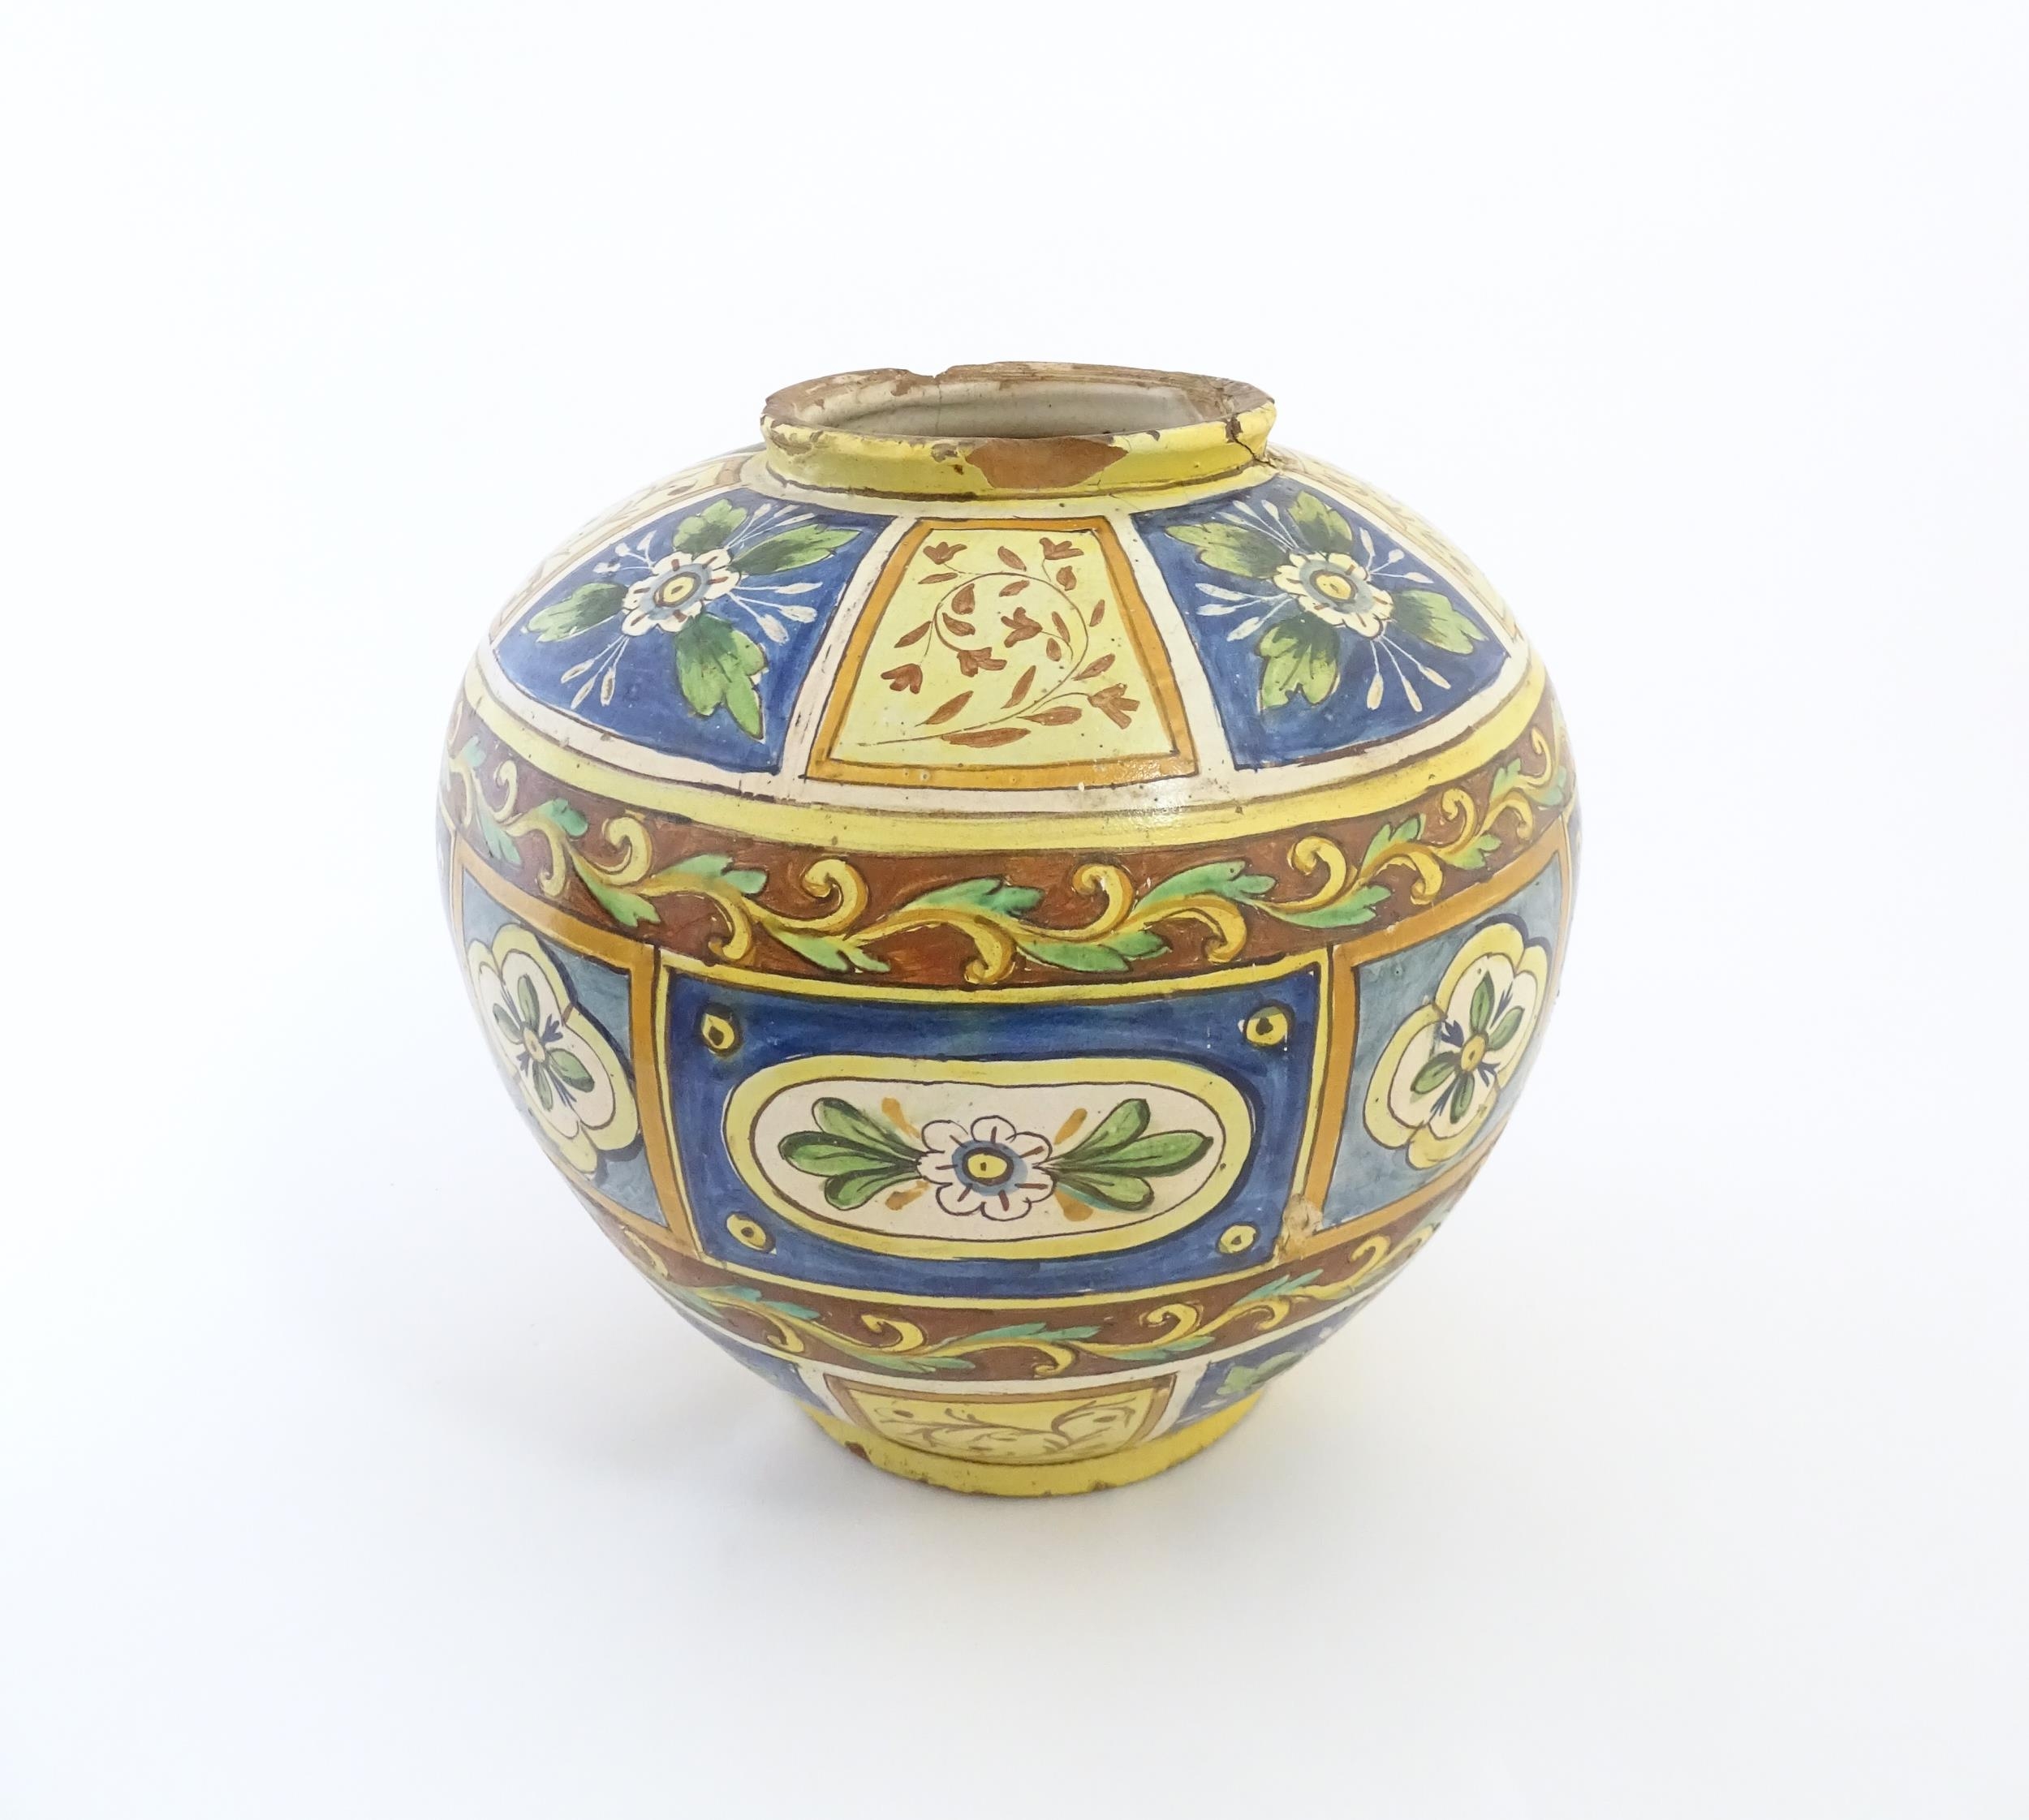 A Sicilian maiolica Bombola vase with panelled and banded decoration depicting flowers and - Image 3 of 10